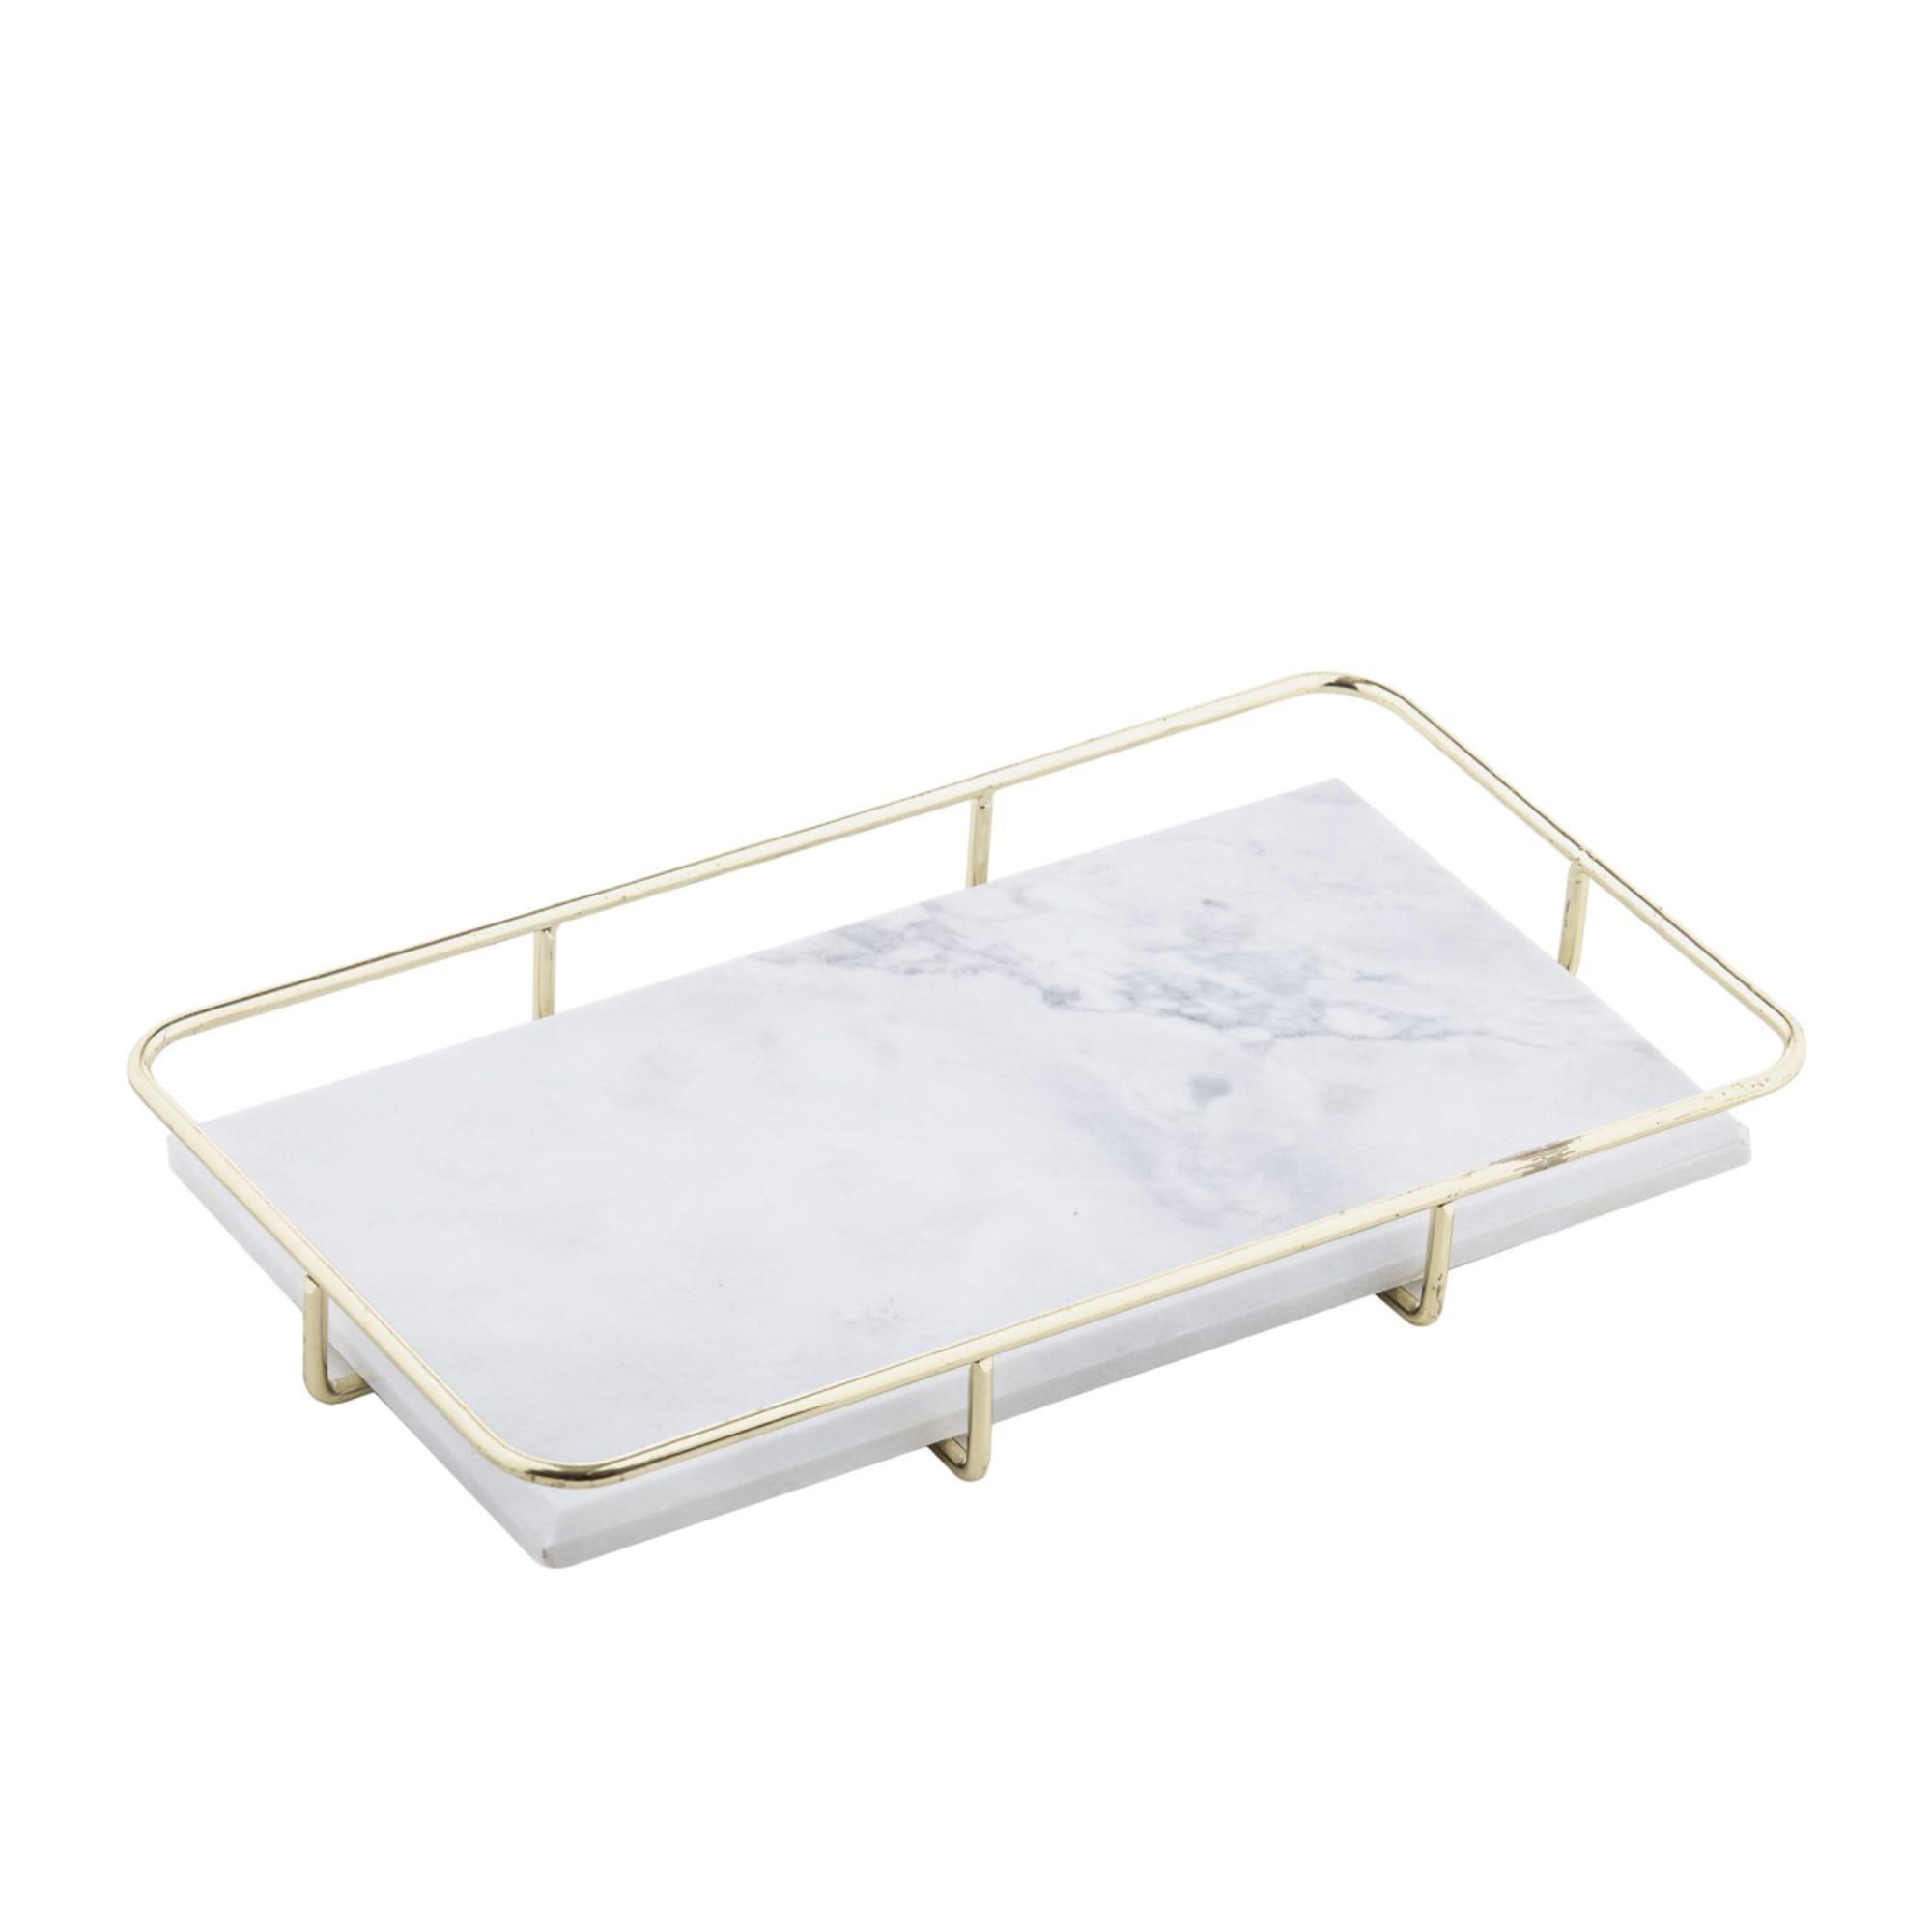 Davis & Waddell Nuvolo Serving Tray 32x15.5cm Image 1